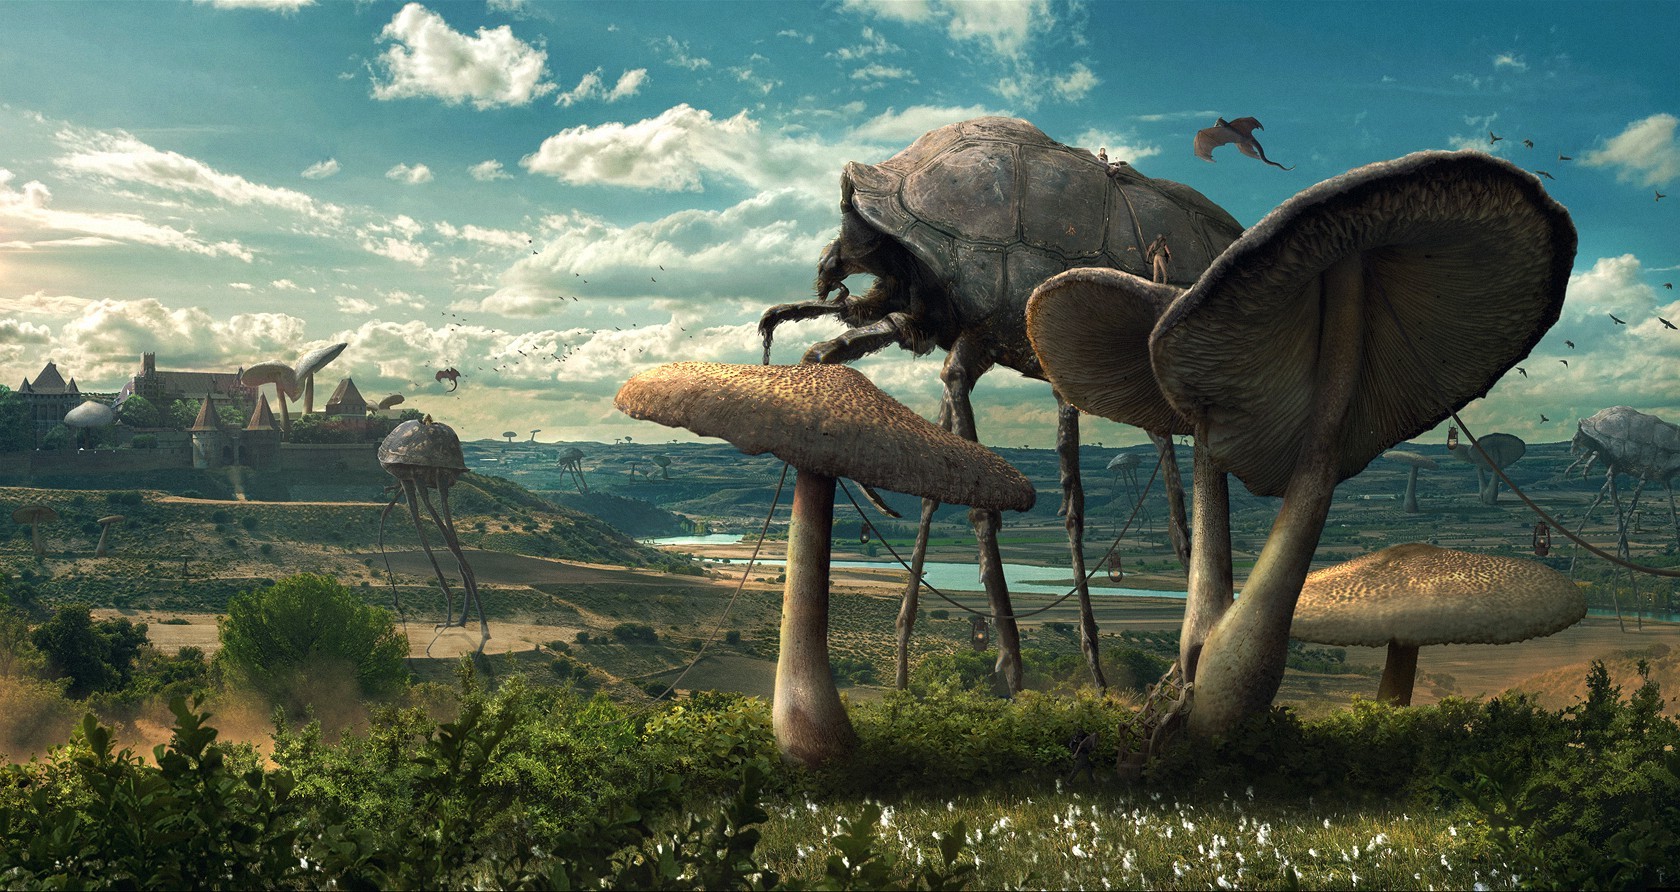 science Fiction, Insect, Parasite, Coexist, Nature, The Elder Scrolls III: Morrowind Wallpaper